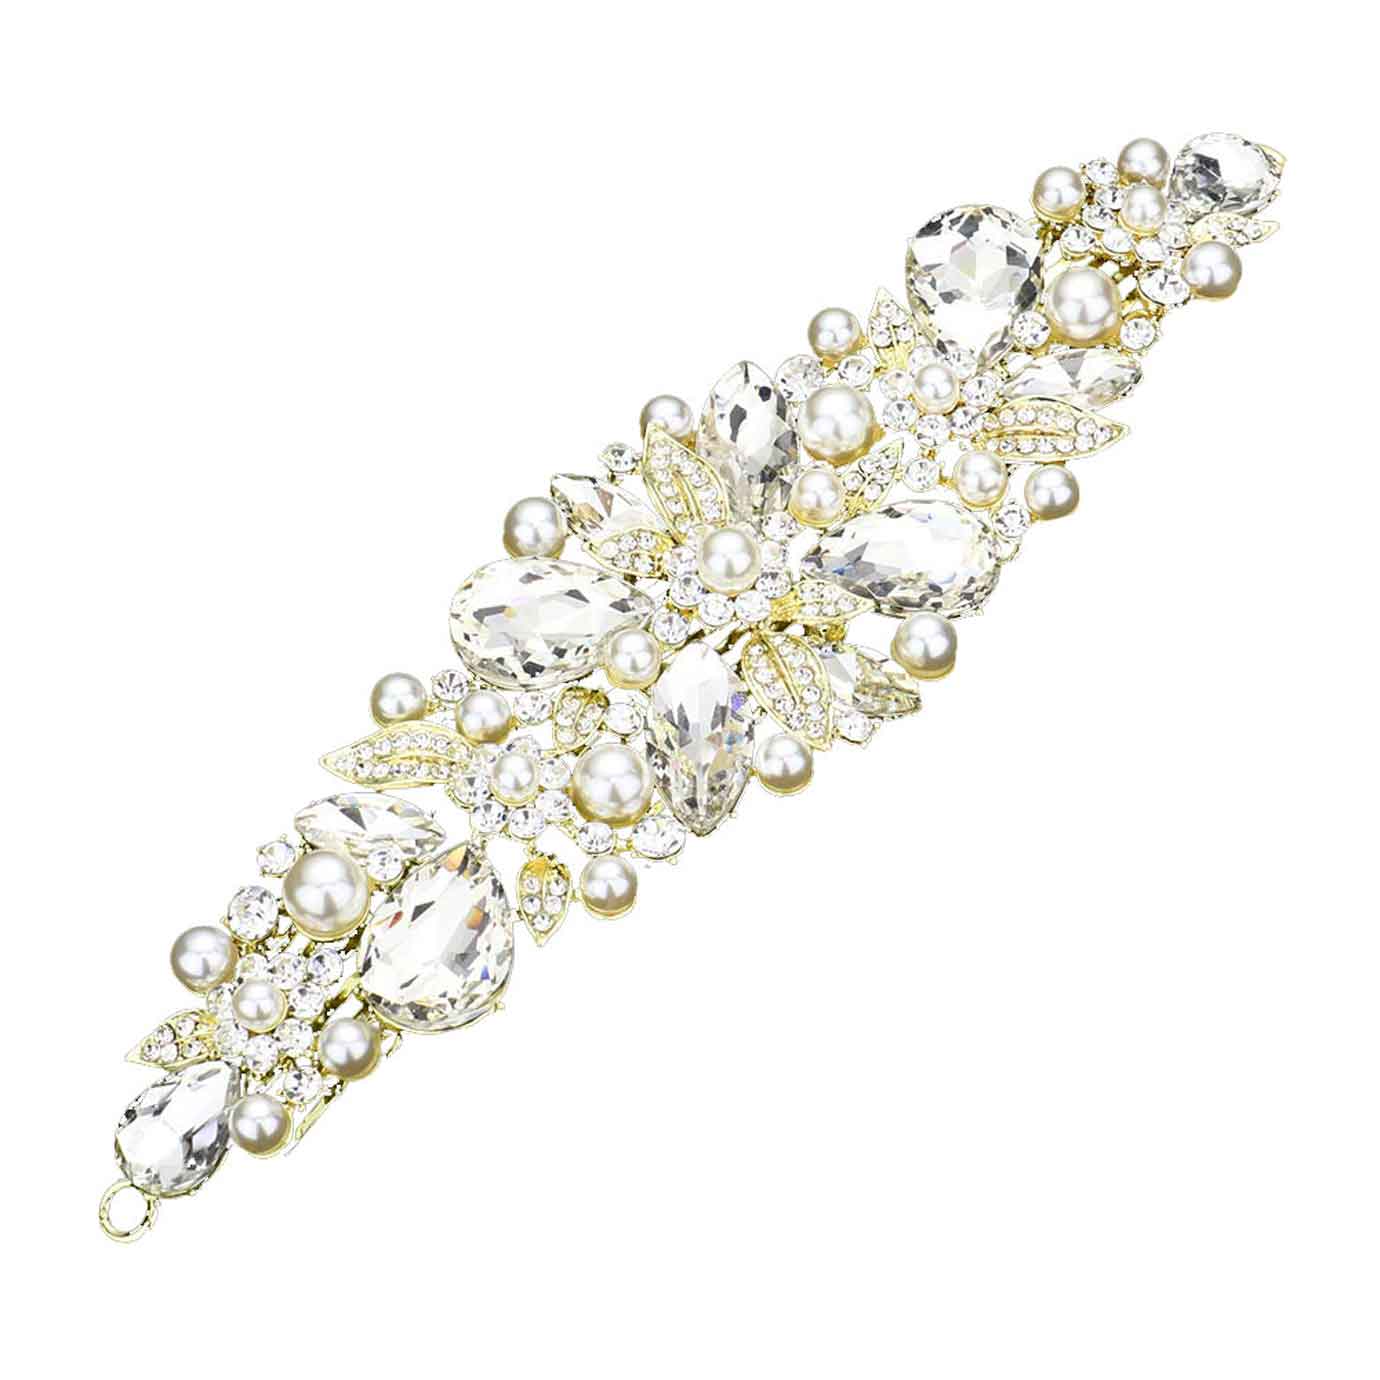 Gold Pearl Multi Stone Embellished Flower Leaf Hair Comb, Perfect for adding just the right amount of shimmer & shine, will add a touch of class, beauty and style to your wedding, prom, special events, embellished pearl stone to keep your hair sparkling all day & all night long. The elegant design will enhance your beauty, attracting everyone's attention and transforming you into a bright star to wear with this hair comb.